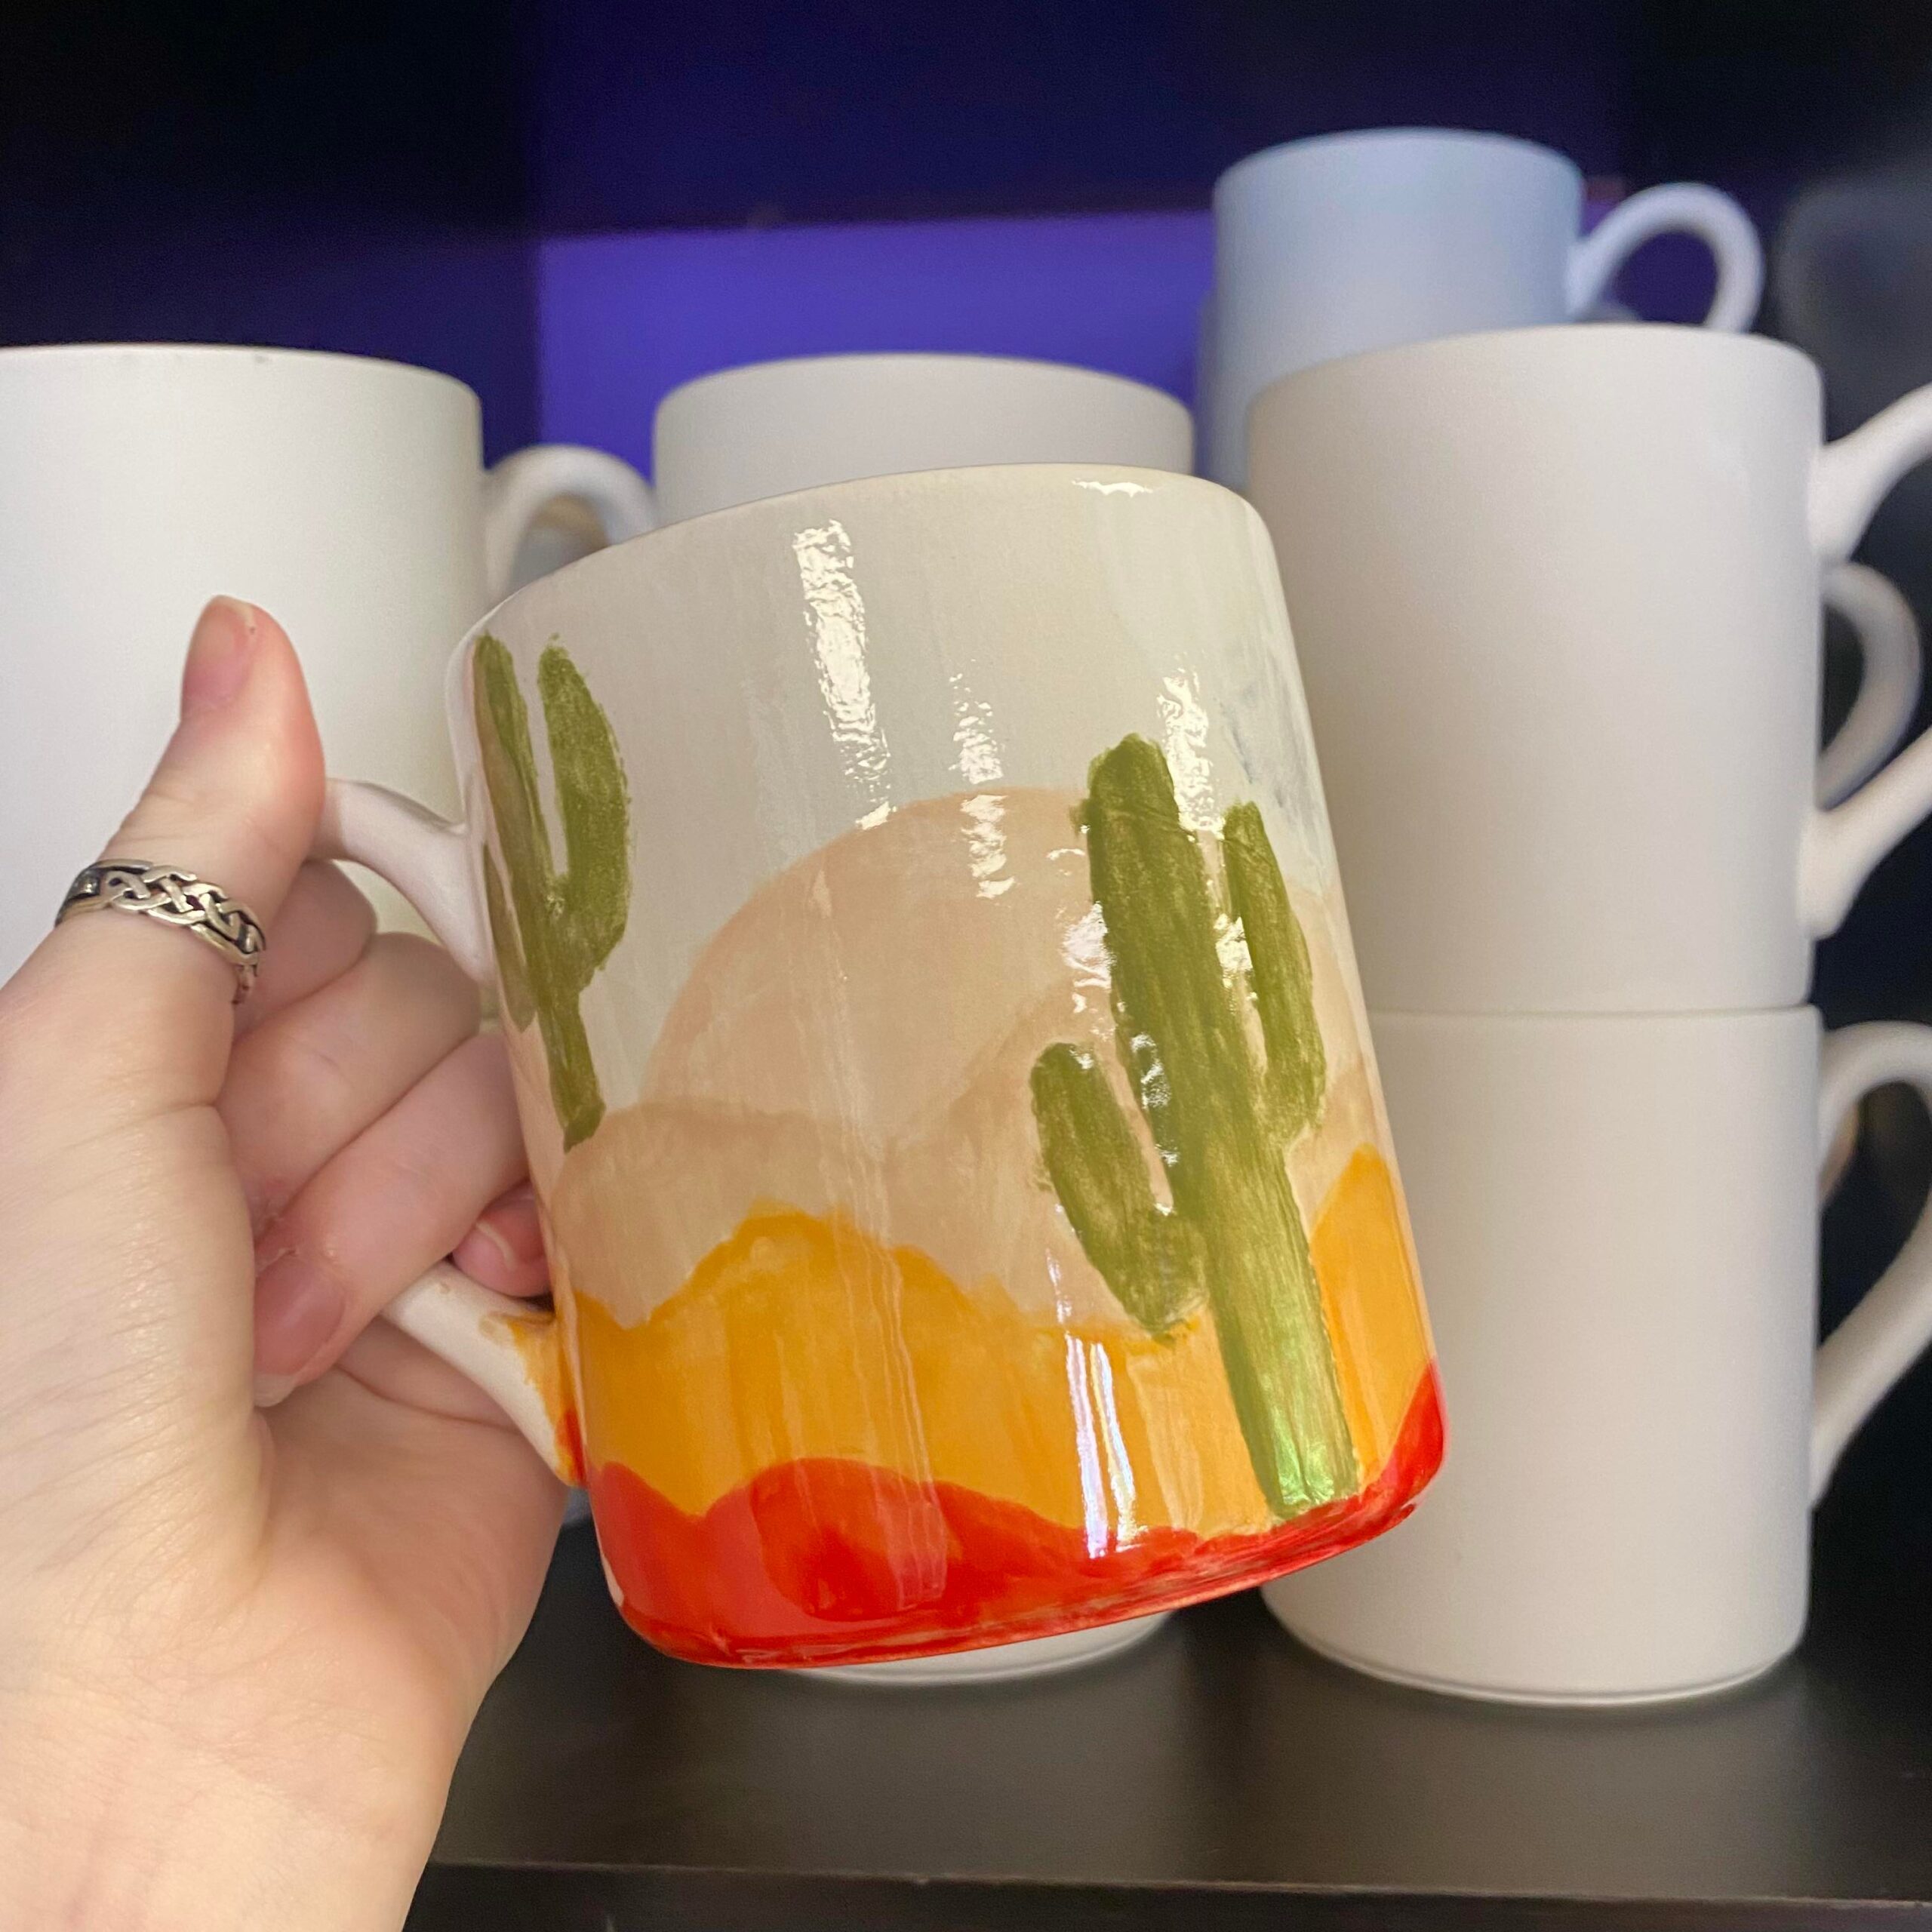 A hand holding a coffee mug with cactus on it.